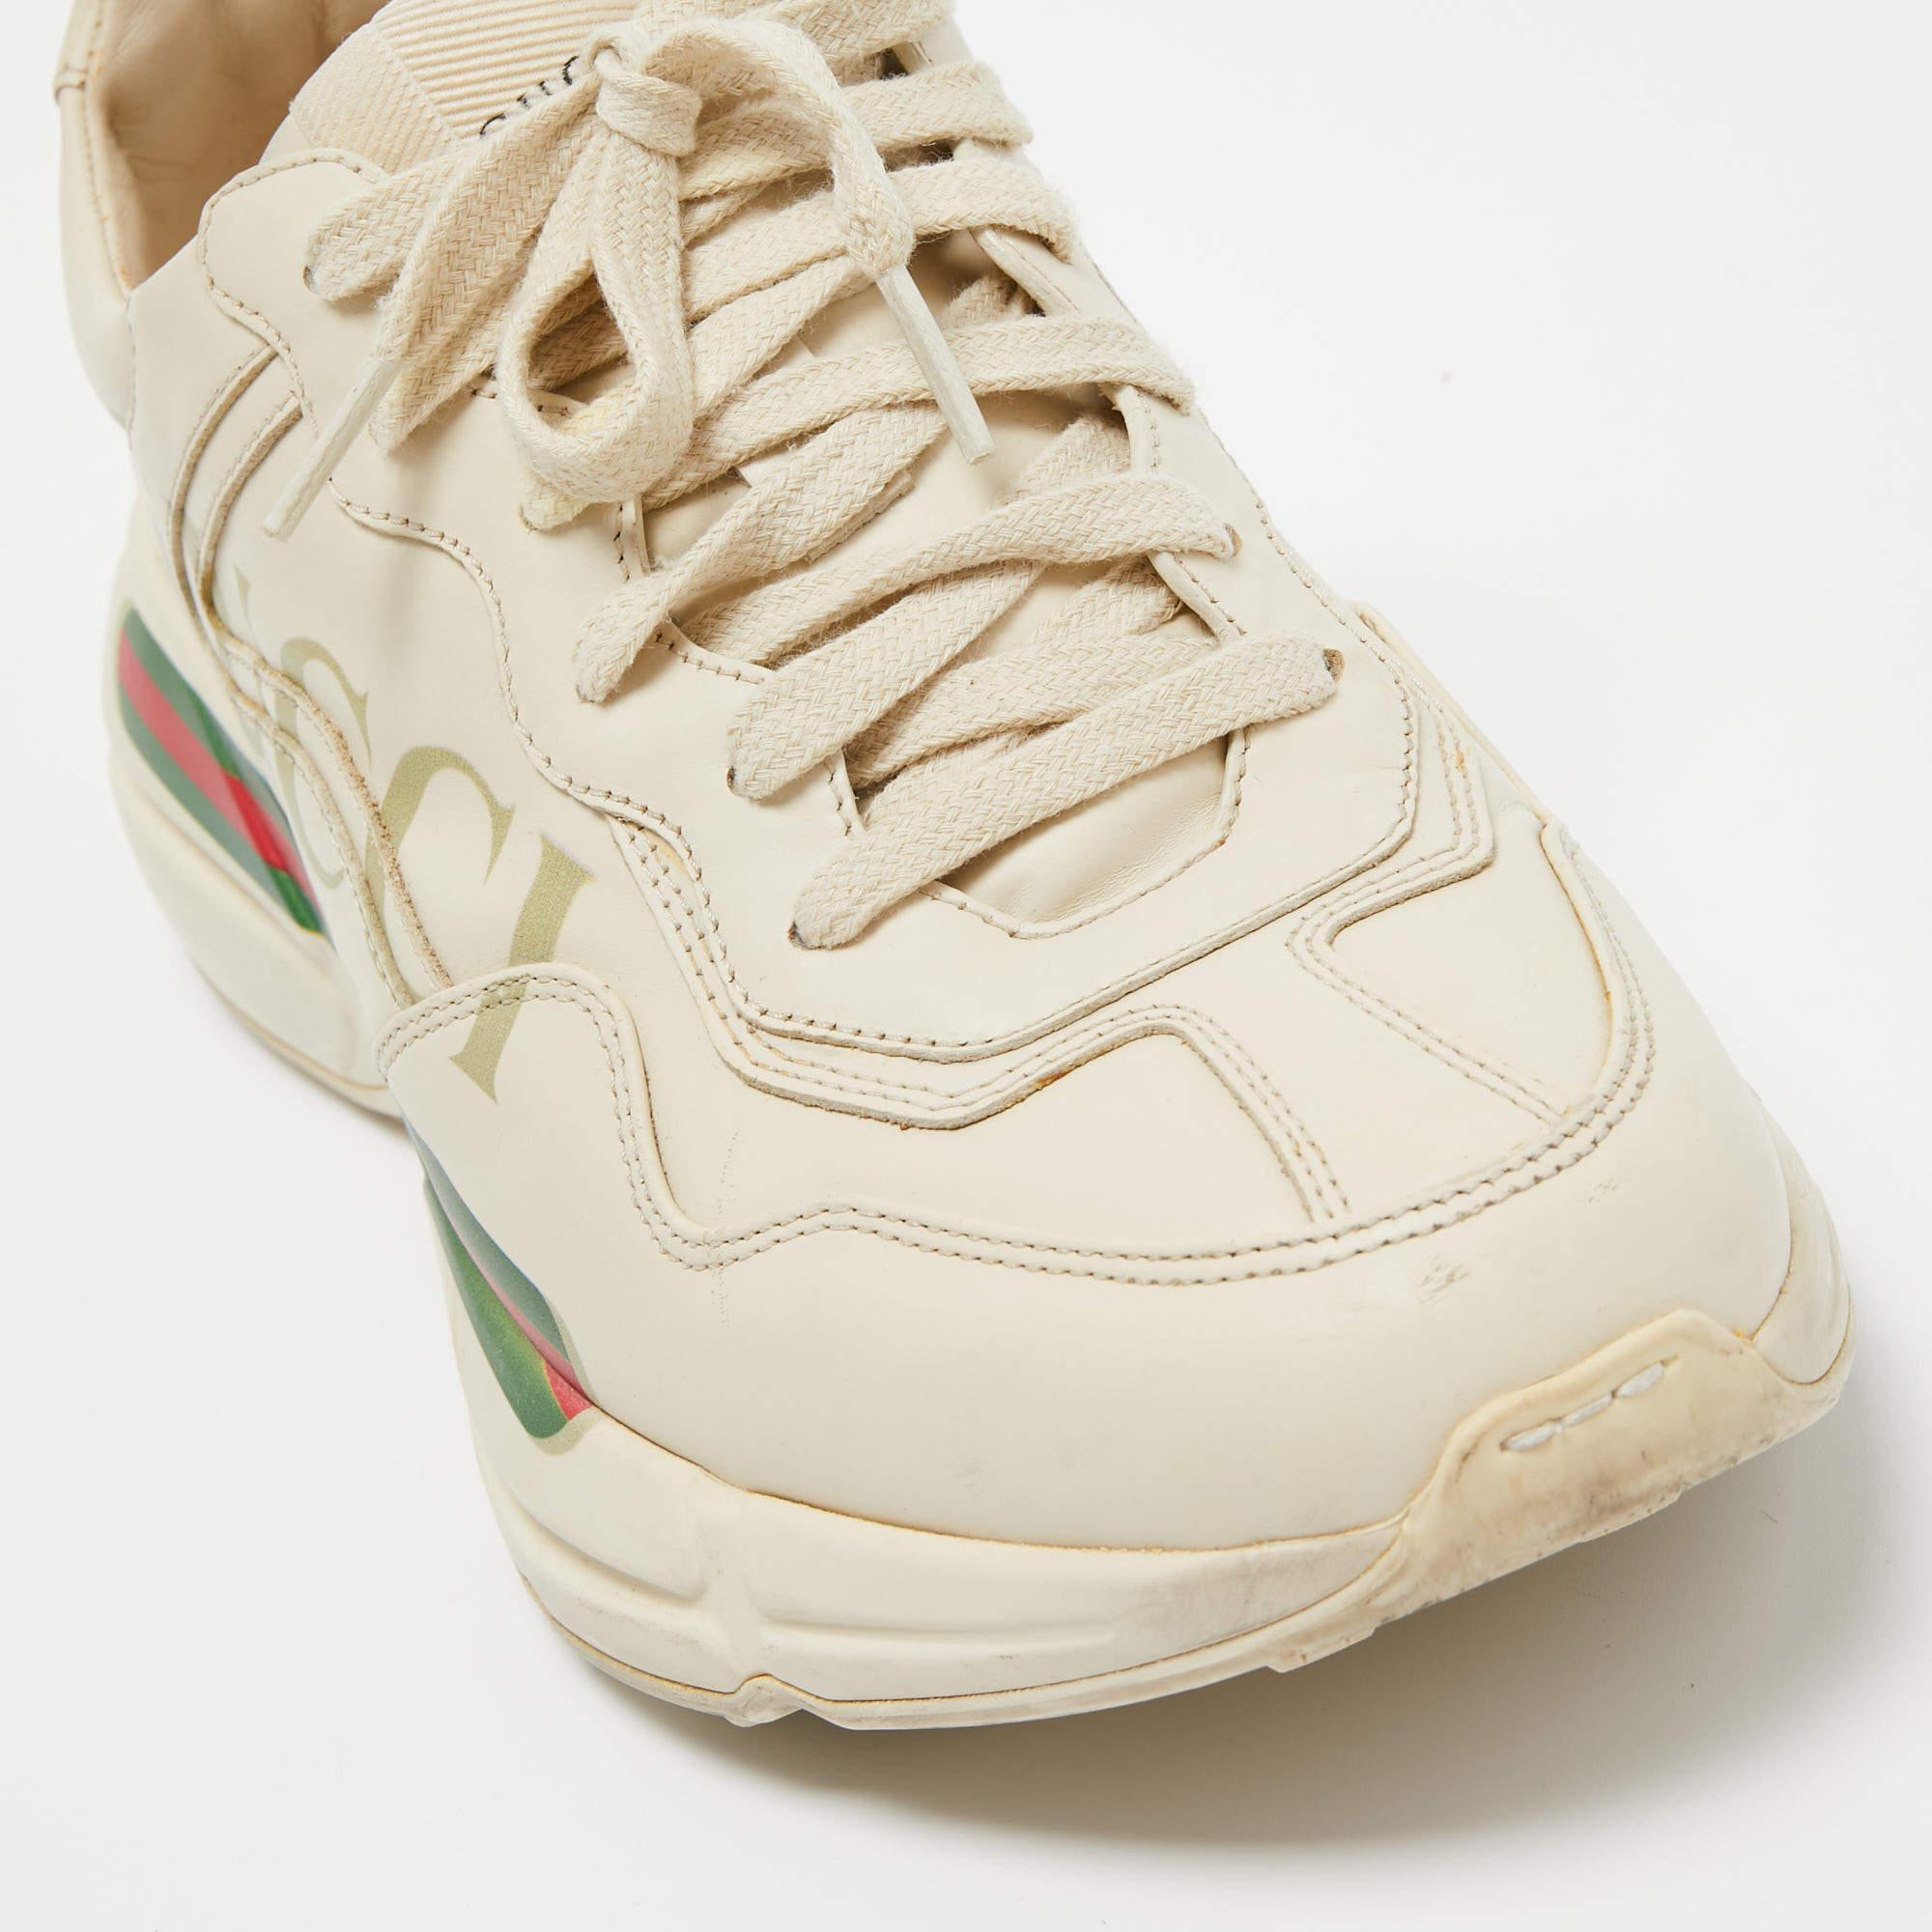 Gucci Cream Leather Rhyton Low Top Sneakers Size 40.5 2